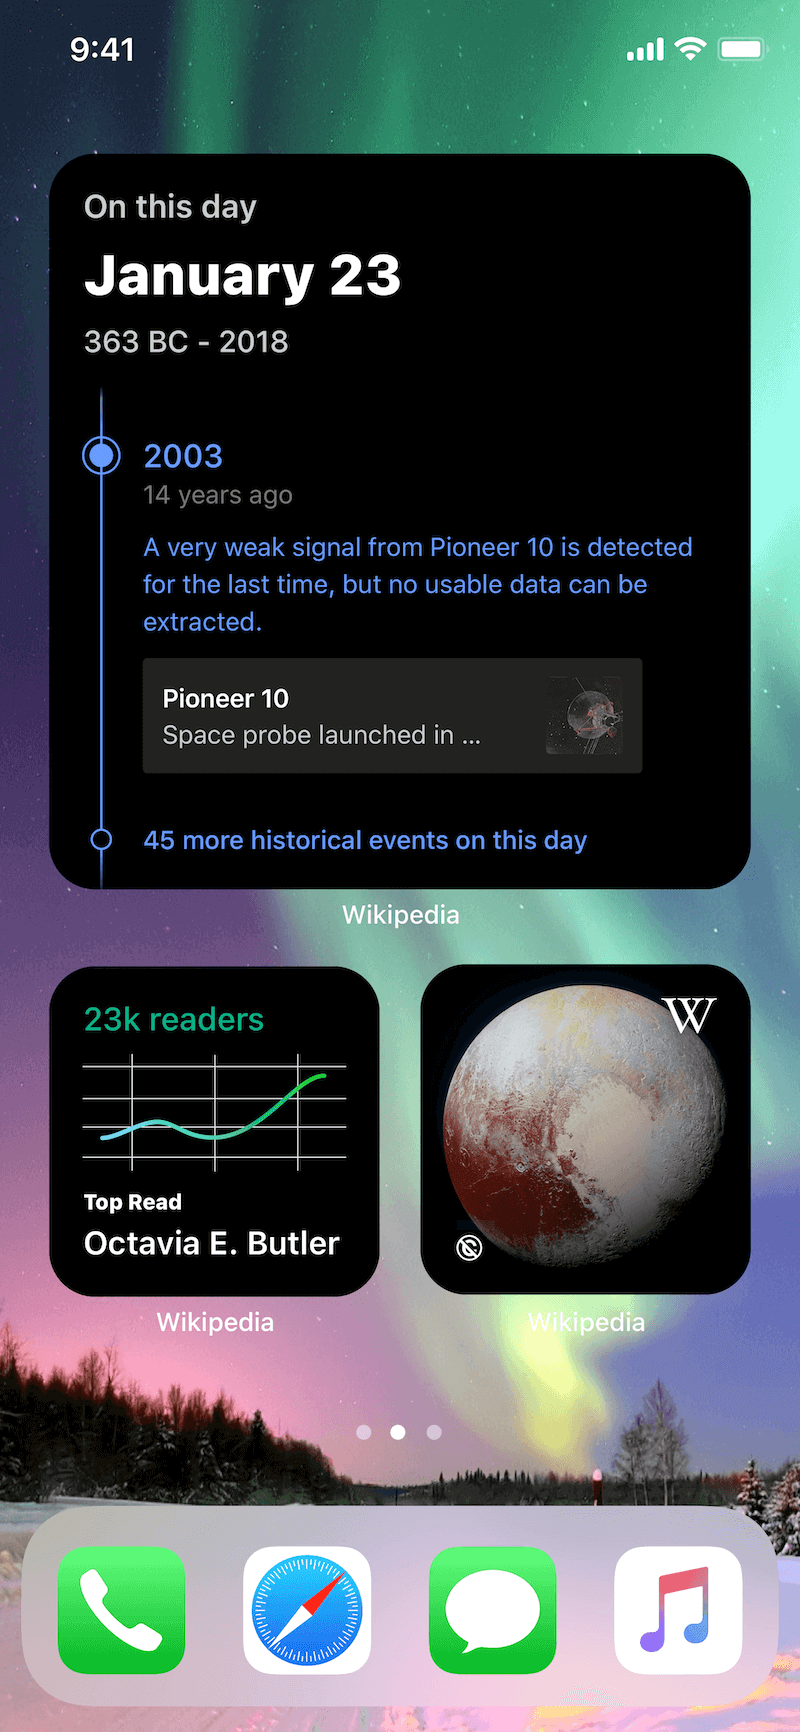 Wikipedia for iOS focuses on the essential in its homescreen widgets.